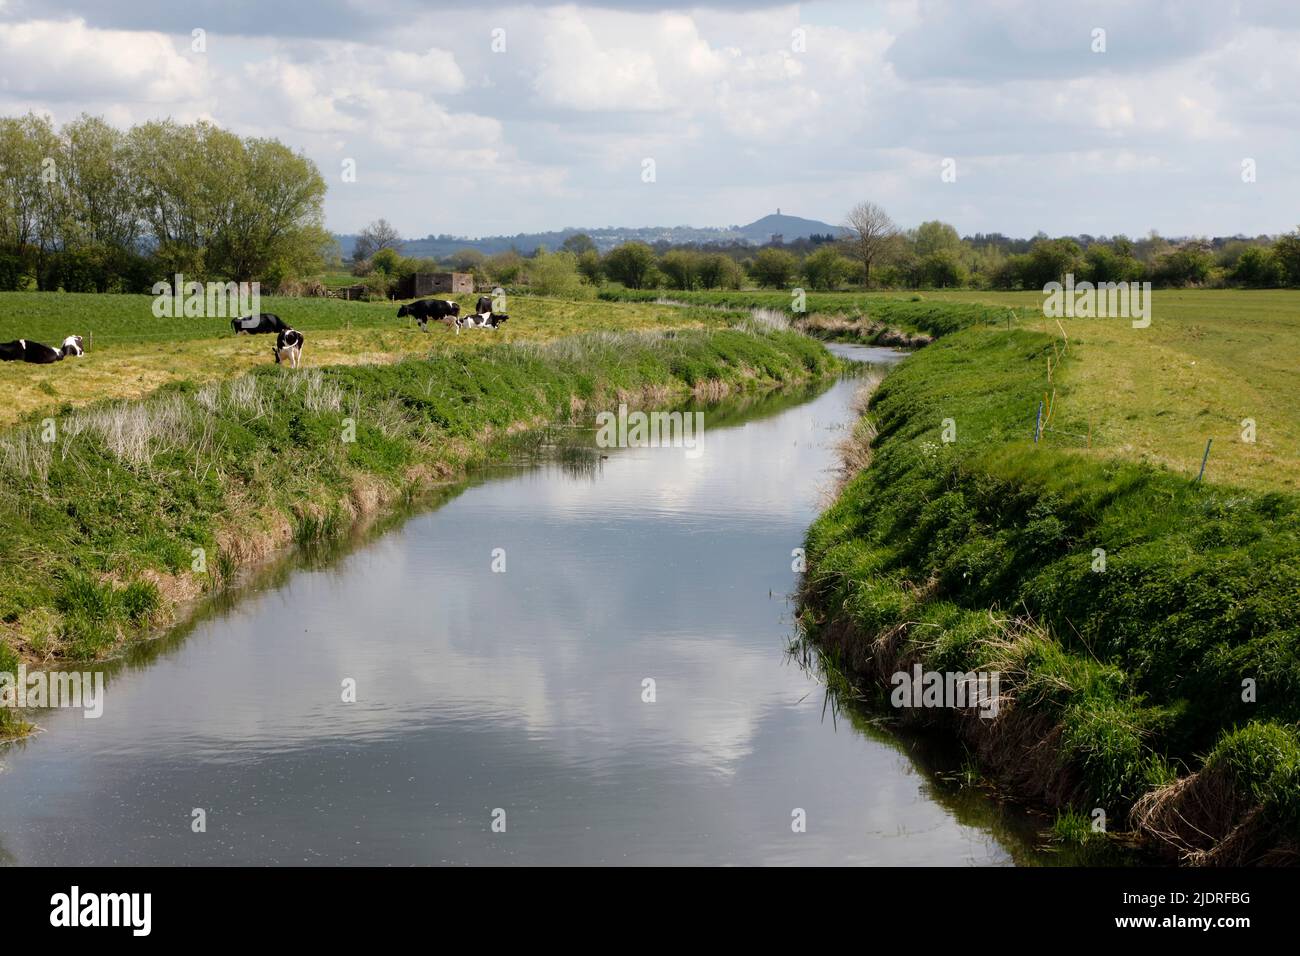 River Brue near Westhay, Somerset Levels, Somerset, England, UK. Glastonbury Tor can be seen in the far distance. Stock Photo